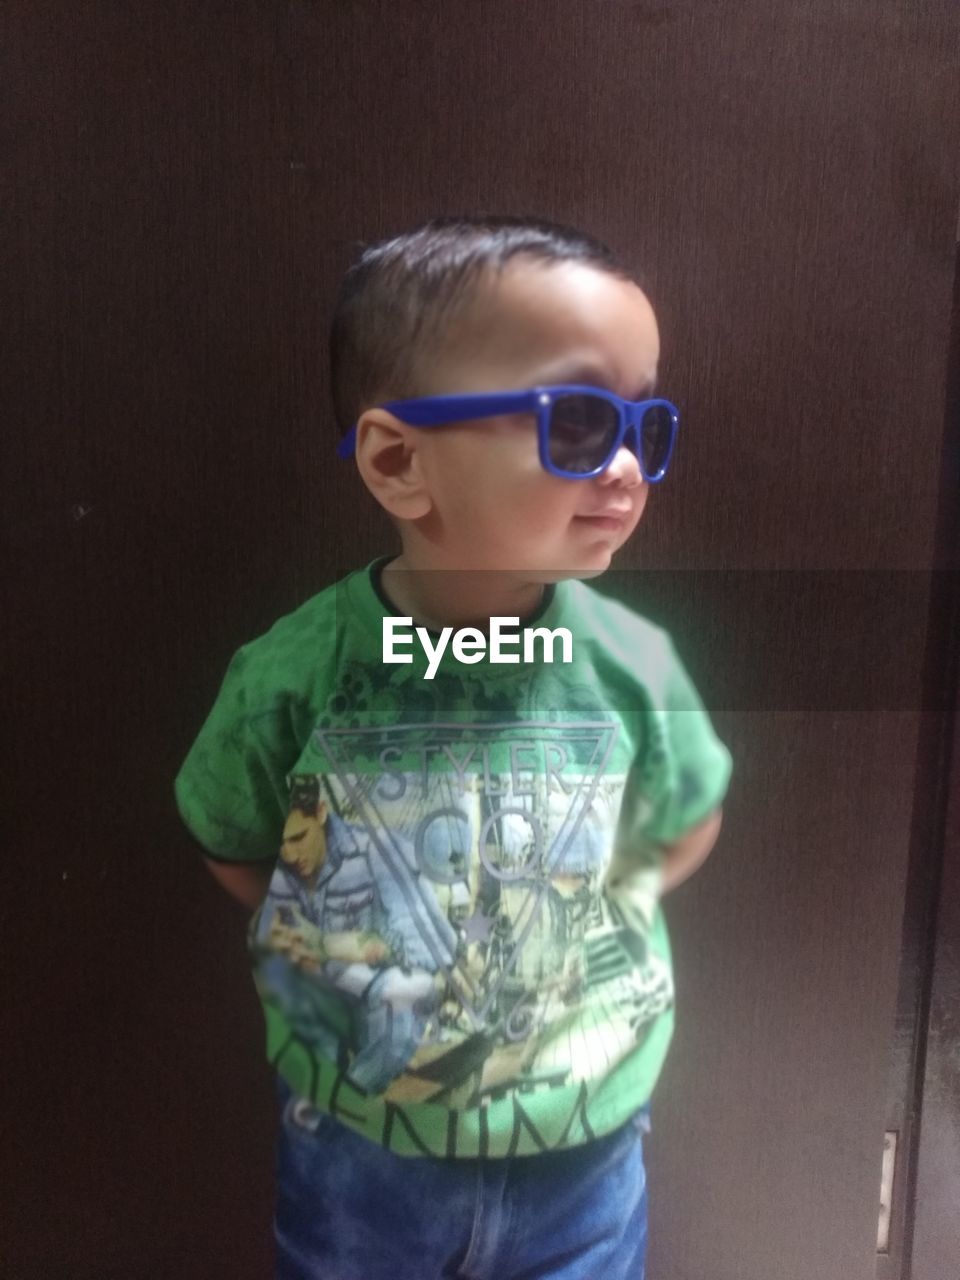 BOY WEARING SUNGLASSES STANDING AGAINST CURTAIN